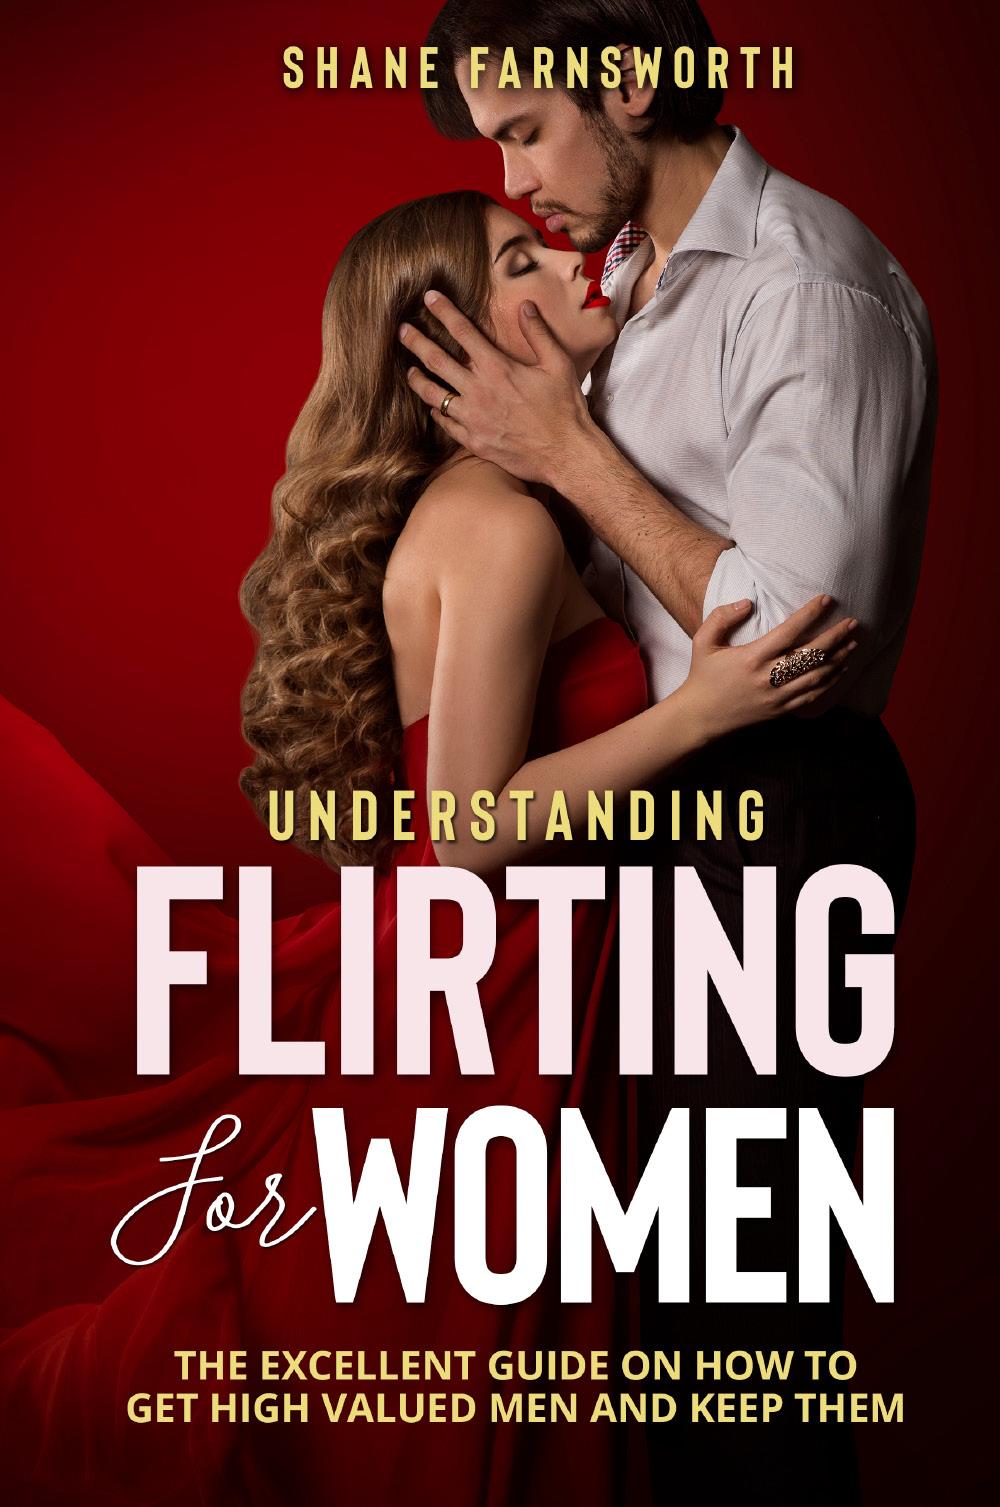 UNDERSTANDING FLIRTING FOR WOMEN. The excellent guide on how to get high valued men and keep them